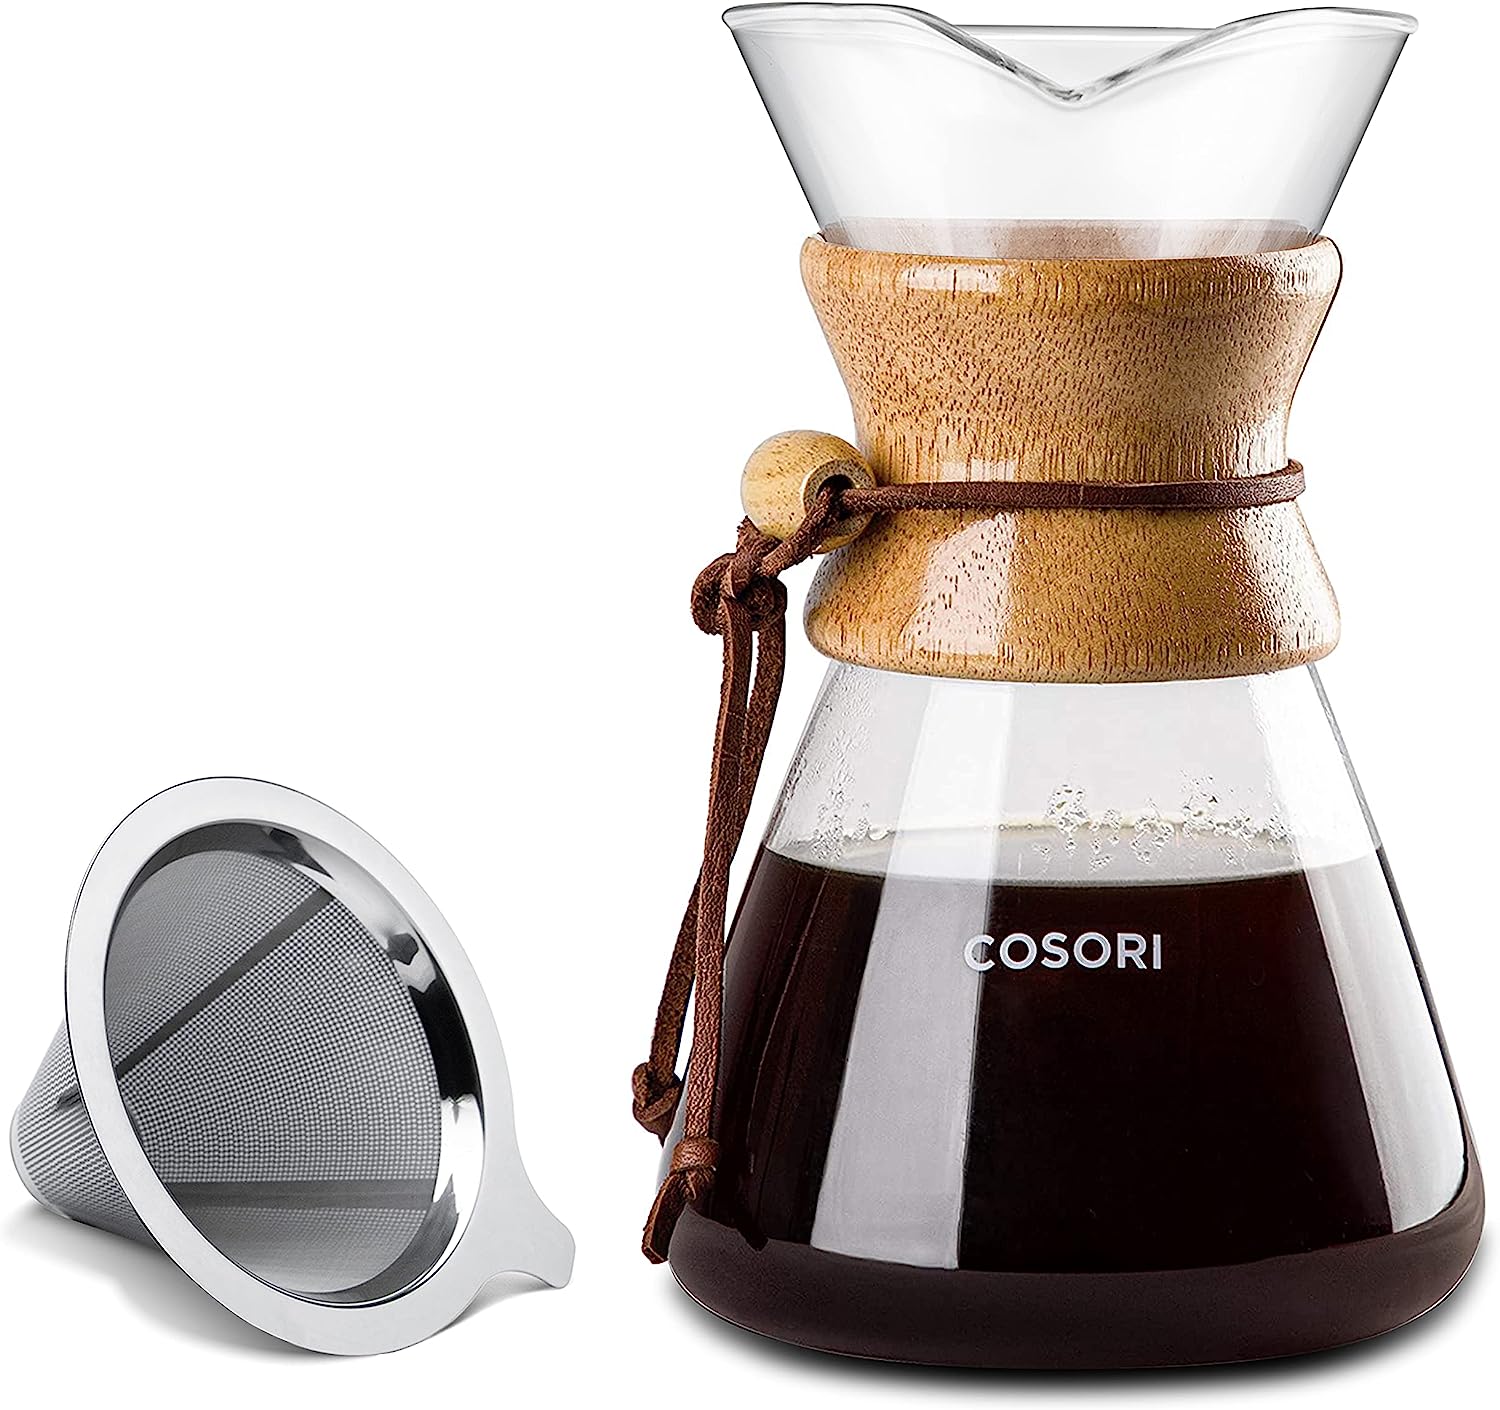 COSORI Pour Over Coffee Maker with Double Layer Stainless Steel Filter, 8-Cup, Coffee Dripper Brewer, High Heat Resistant Carafe, also for Camping, Hiking